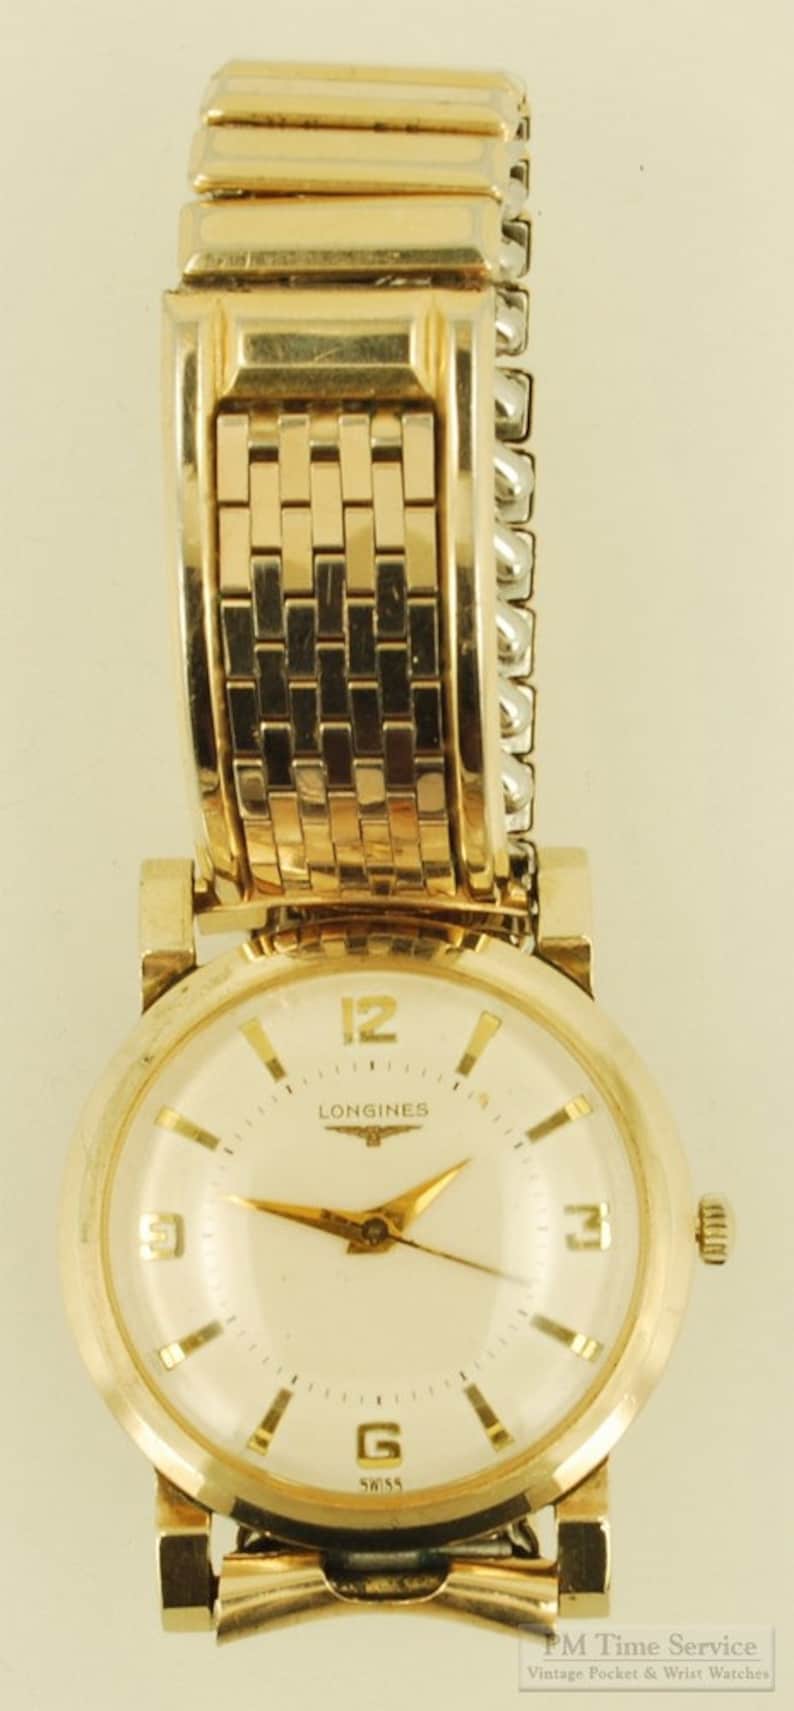 Longines grade 23ZS vintage wrist watch, 17 jewels, yellow gold filled round case with fancy faceted extended lugs image 4